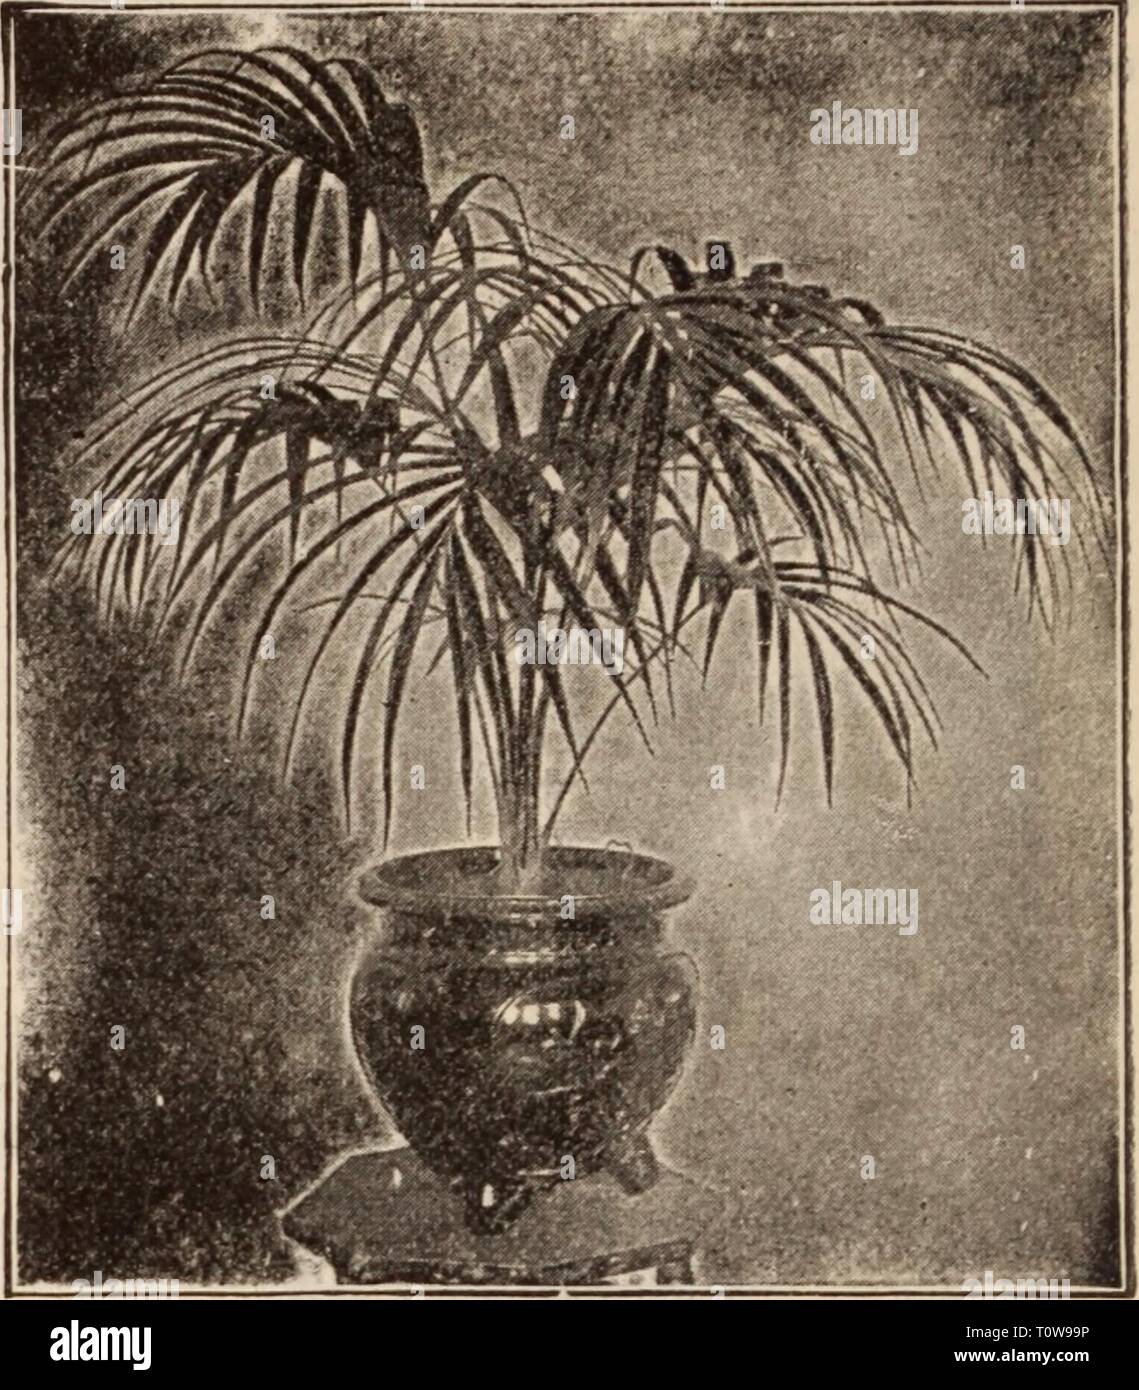 Dreer's wholesale price list  Dreer's wholesale price list / Henry A. Dreer.  dreerswholesalep1912dree Year:   Kentia ForsterianaâSingle Plants. D02. 100 1000 2V4-inch pots, 4 leaves, 8 to 12 in. high . . 11 50 $10 00 190 00 3 4 to 5 12 to 15 ' . . . 2 00 15 00 140 00 4 5 to 6 15 to 18 ' ... 4 50 35 00 Each 5 5 to 6 24 ' . . . . . $0 75 6 6 28 to 30 ' . . . . . 1 00 6 6 34 to 36 ' . . . . . 1 50 7 6 to 7 38 to 40 ' . . . . . 2 00 7-in tubs 6 to 7 40 to 42 ' . . . . . 3 00 8 6 to 7 45 to 48 ' . . . . . 4 00 8 ' 6 to 7 48 ' . . . . . 5 00 10 ' 6 to 7 4)^ to 5 ft. high . . . . 6 00 11 6 to 7 5to5 Stock Photo